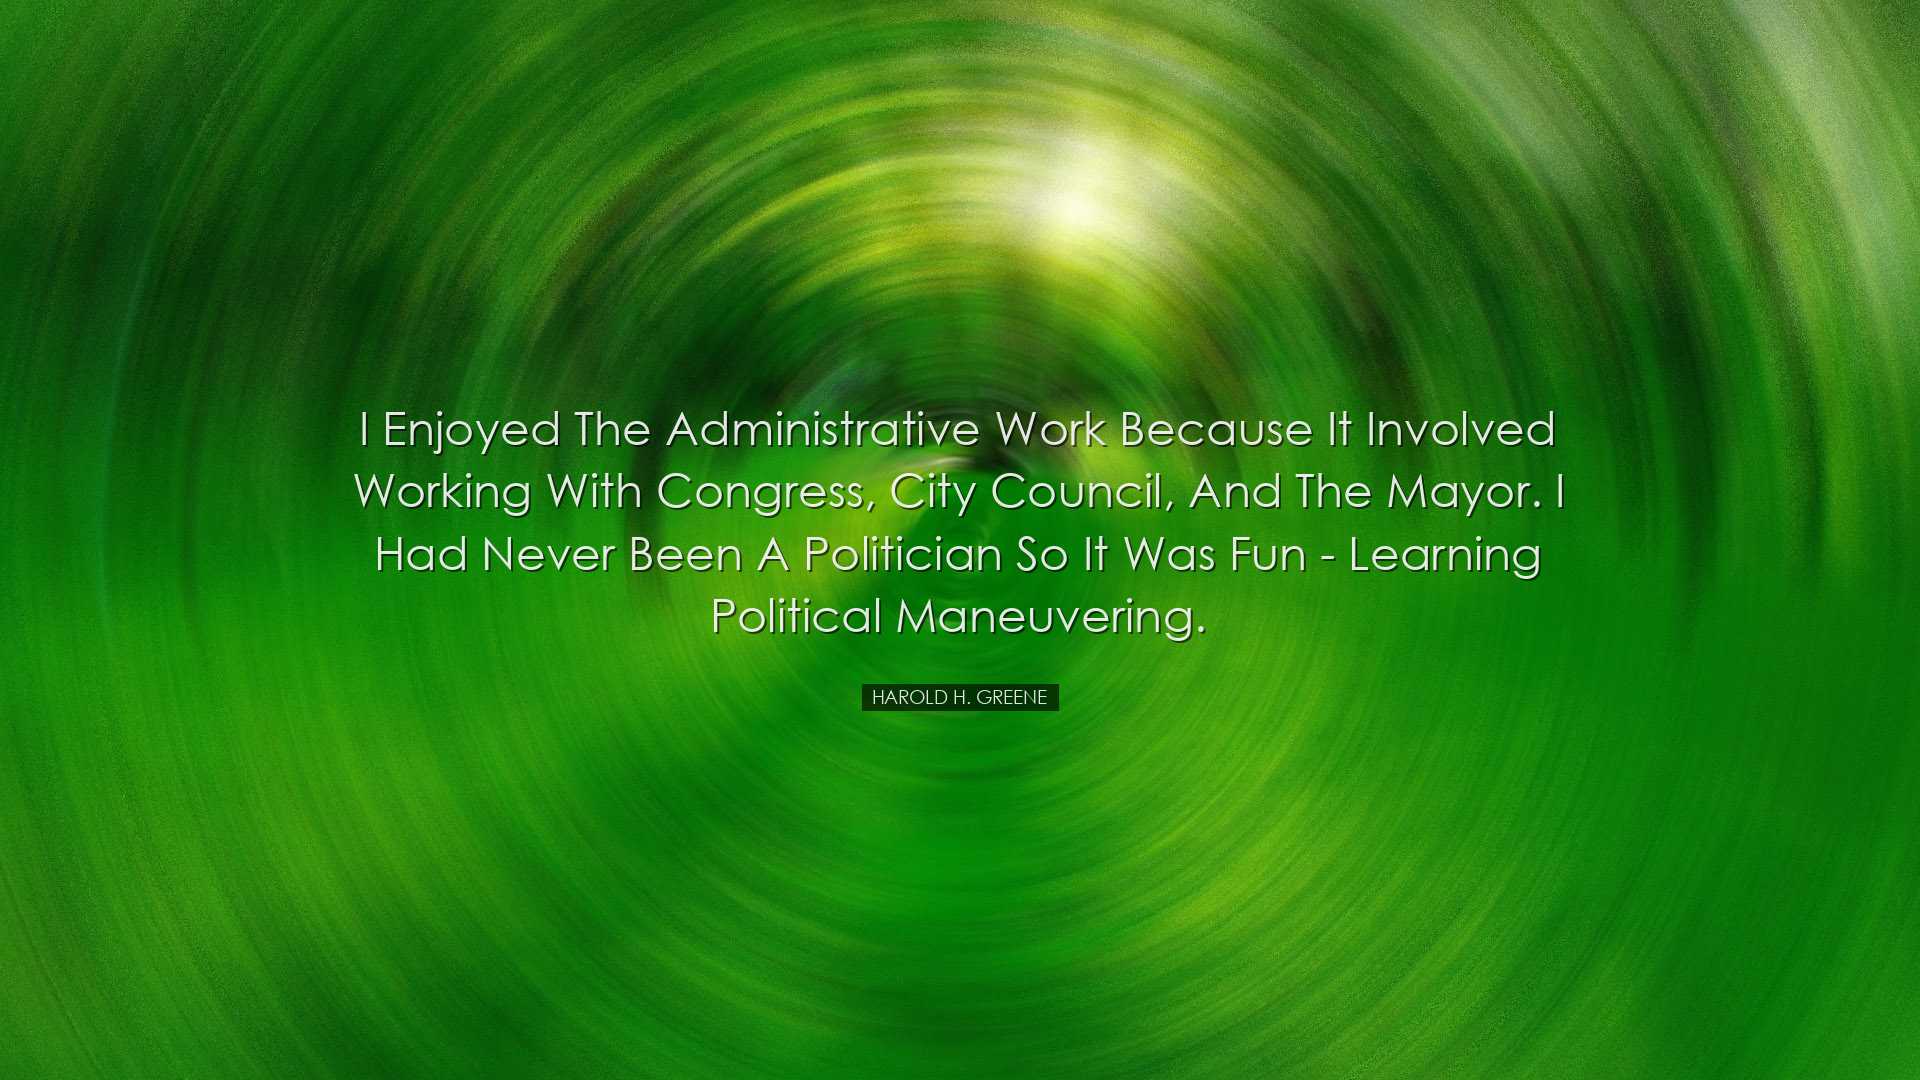 I enjoyed the administrative work because it involved working with